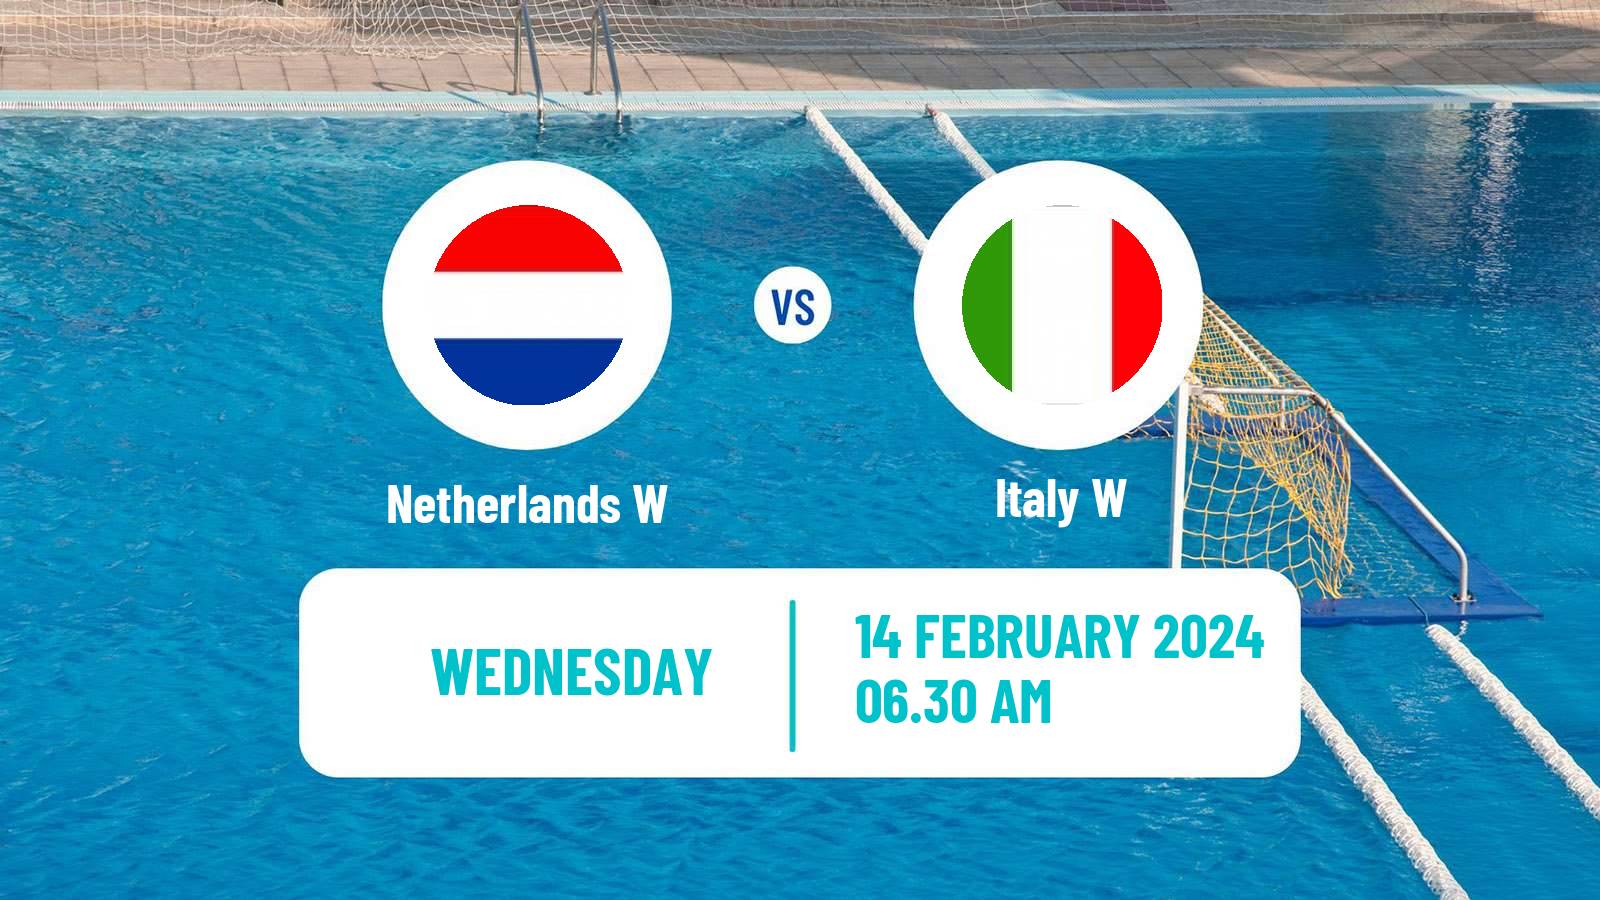 Water polo World Championship Water Polo Women Netherlands W - Italy W